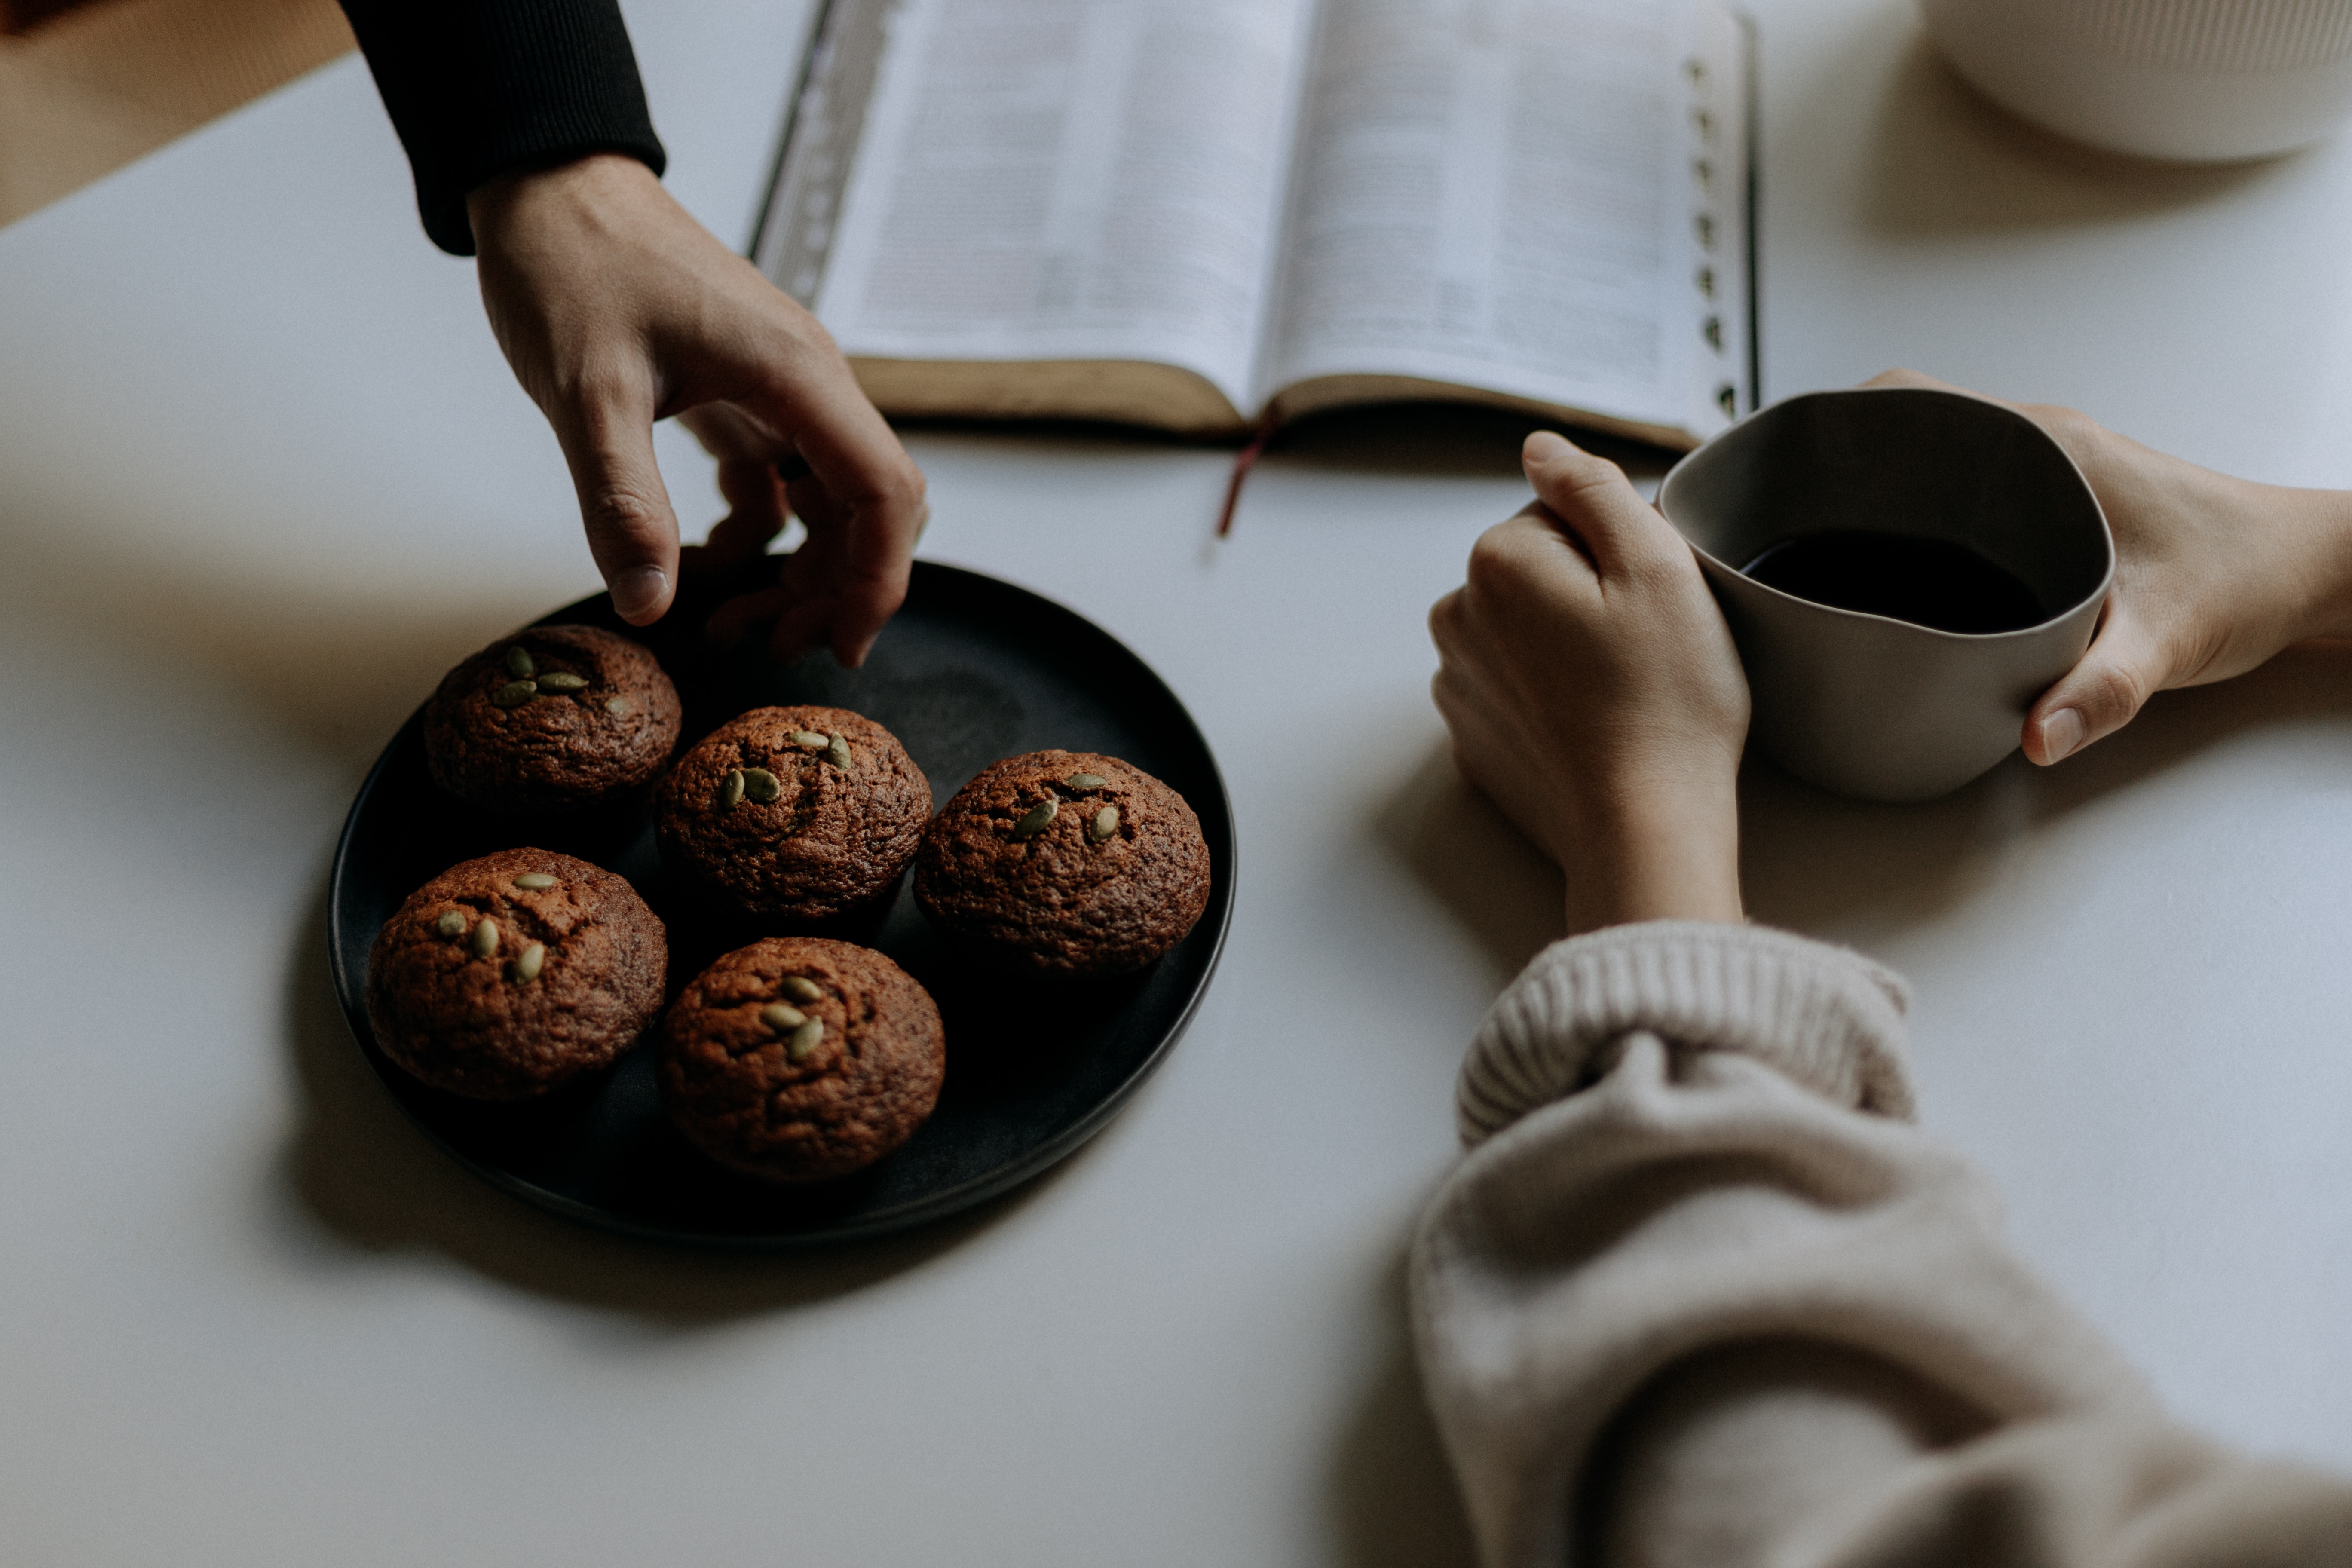 A person grabs a muffin from a plate while another holds a coffee mug. 